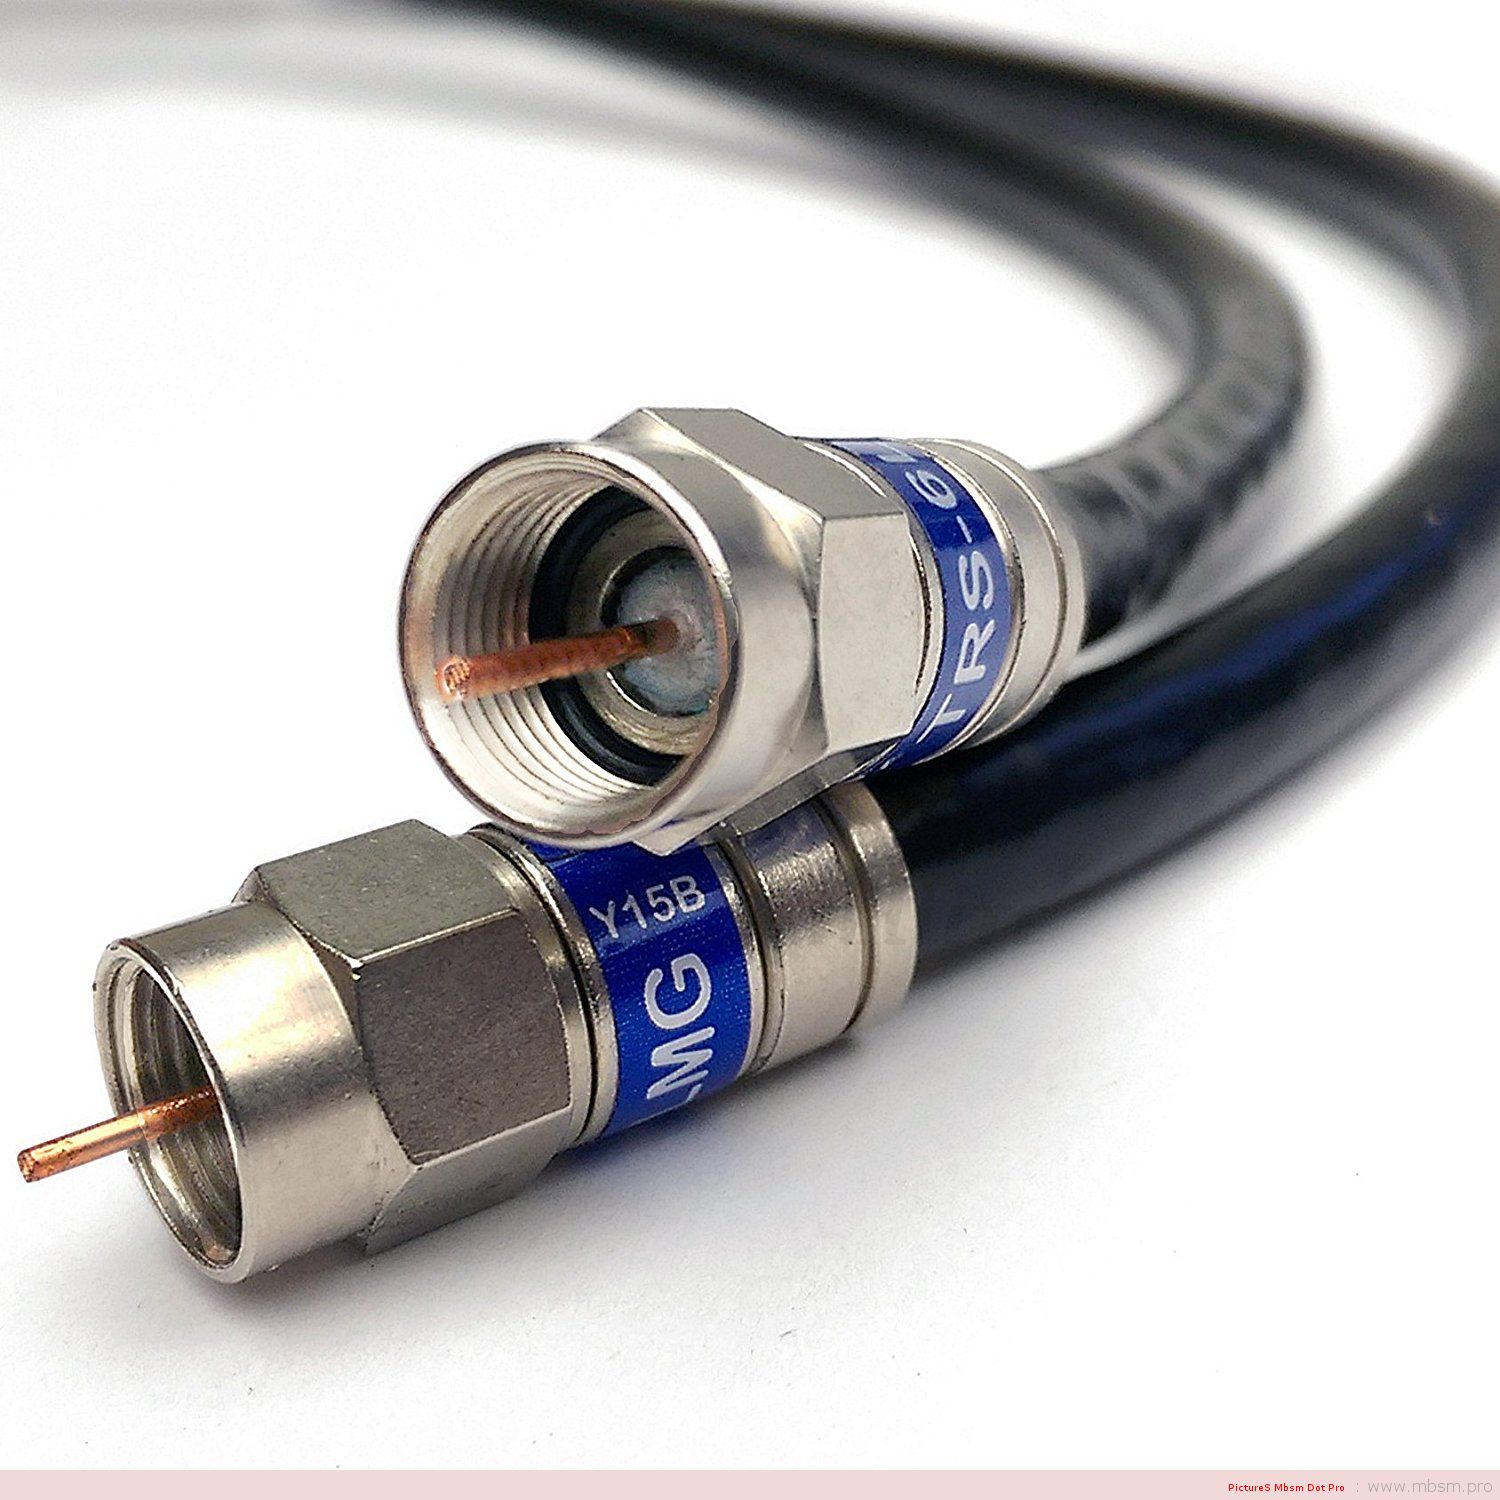 wwwmbsmpro--fiche-f-pour-cble--75-ohms-rg6-coaxial-cable-75-ohm-brass-connector-rg6-fittings-mbsm-dot-pro